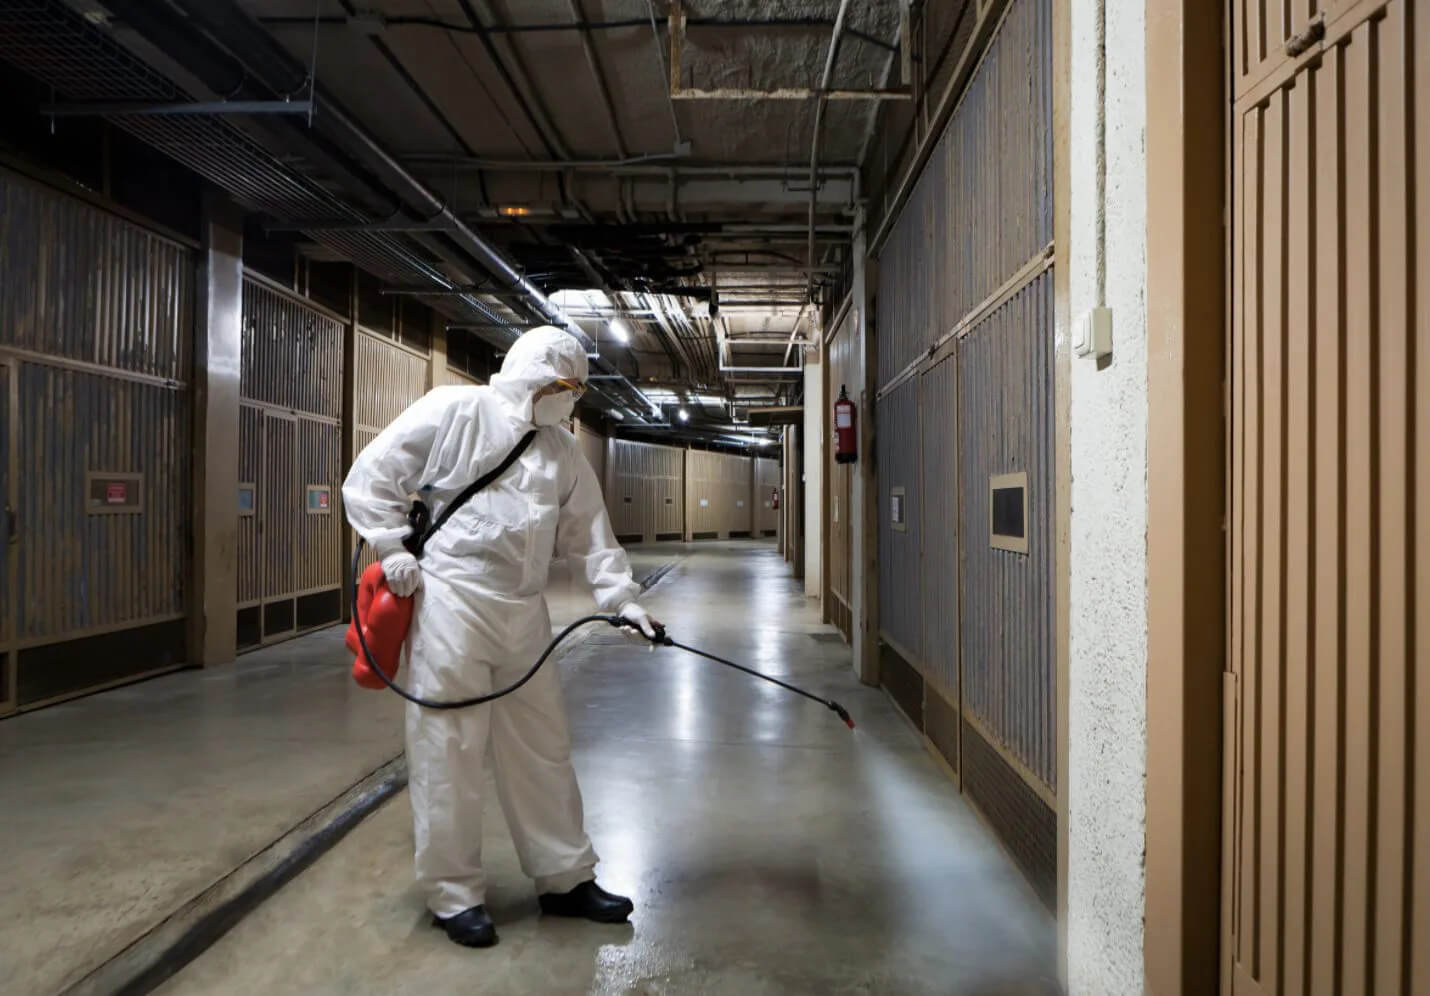 Employee disinfecting surfaces with a sprayer